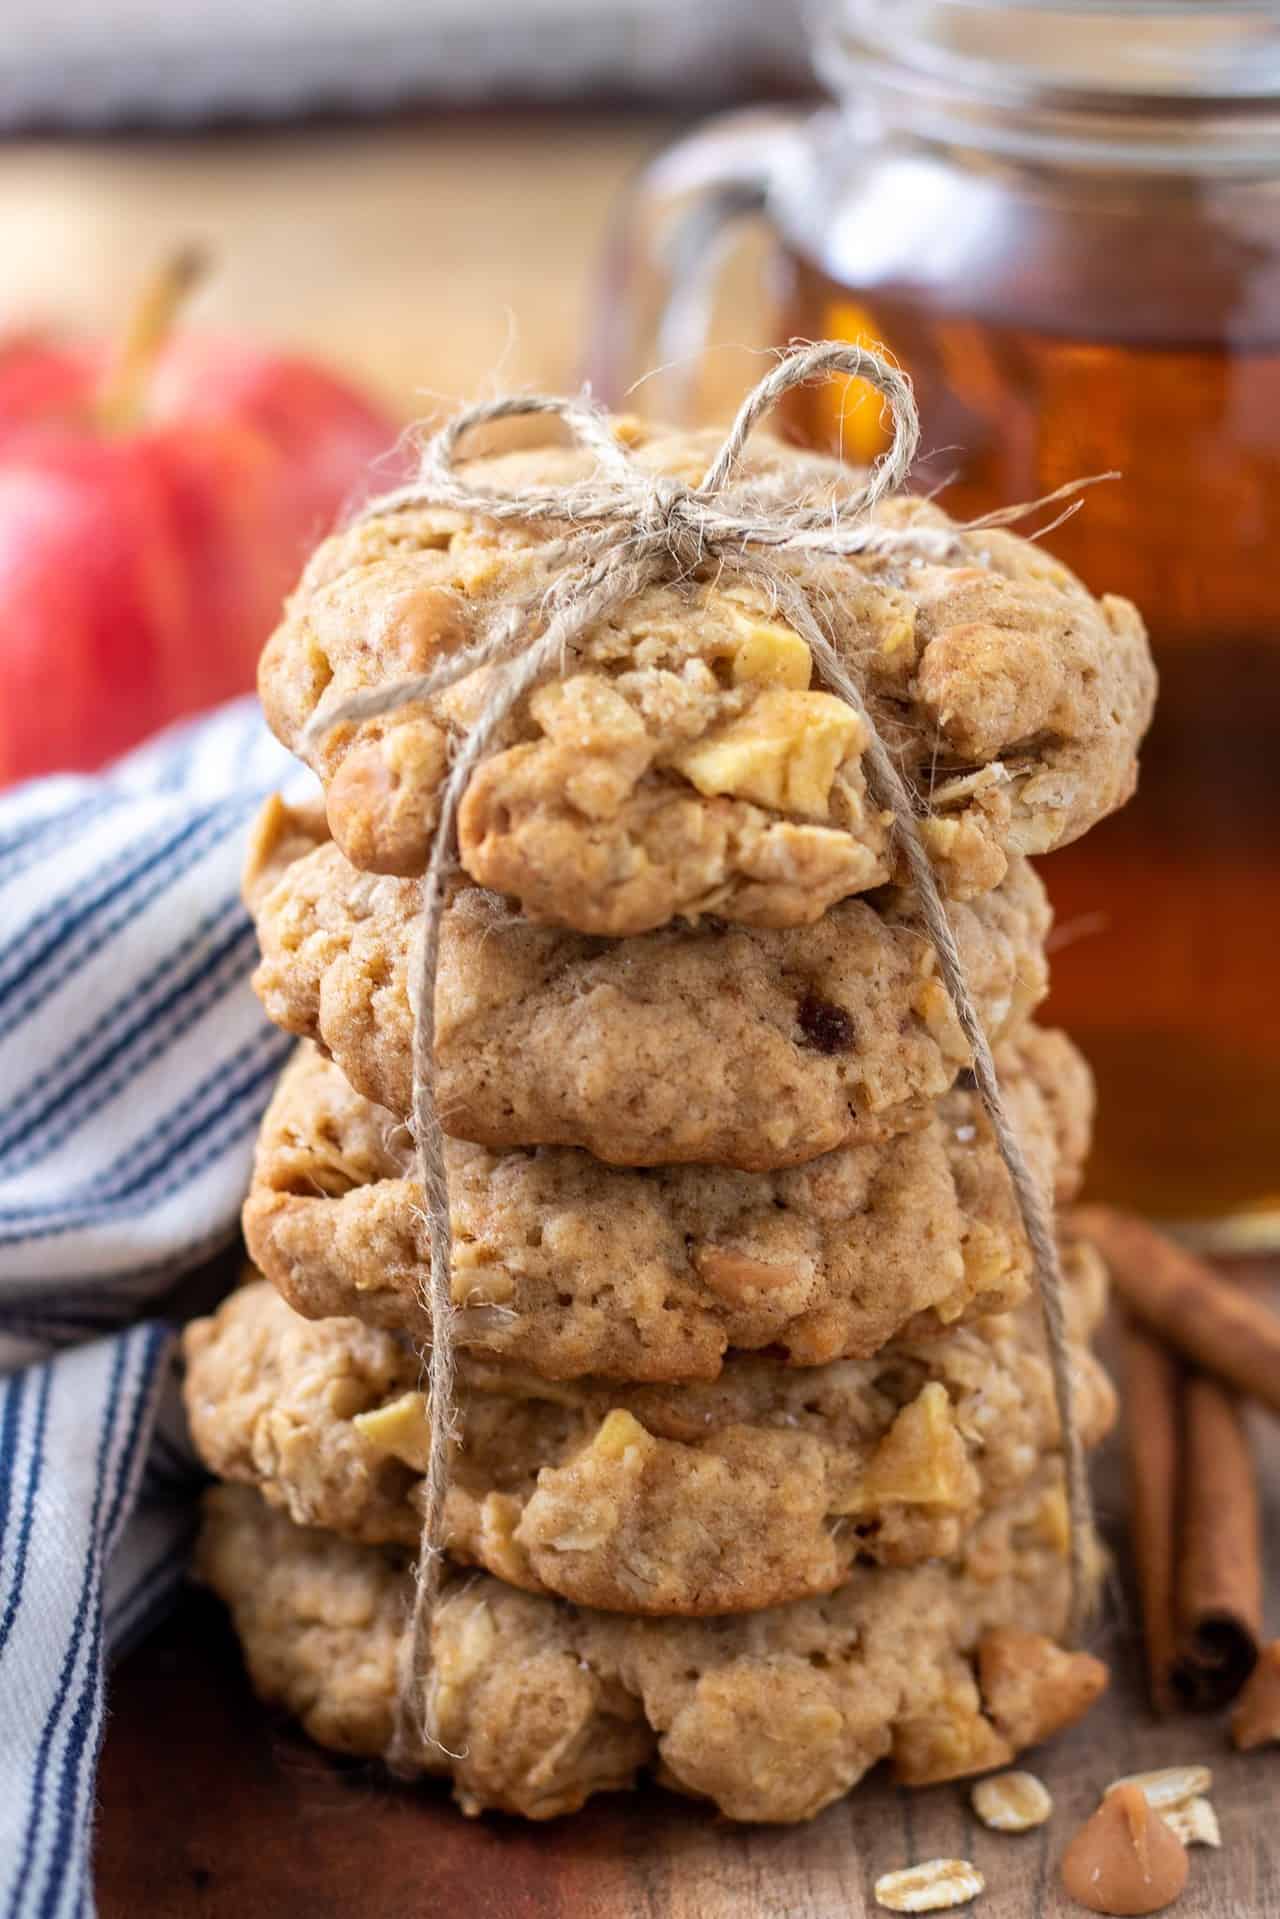 A stack of oatmeal cookies tied together with string. There's two cinnamon sticks next to it and a glass of hot apple cider in the background with a red apple